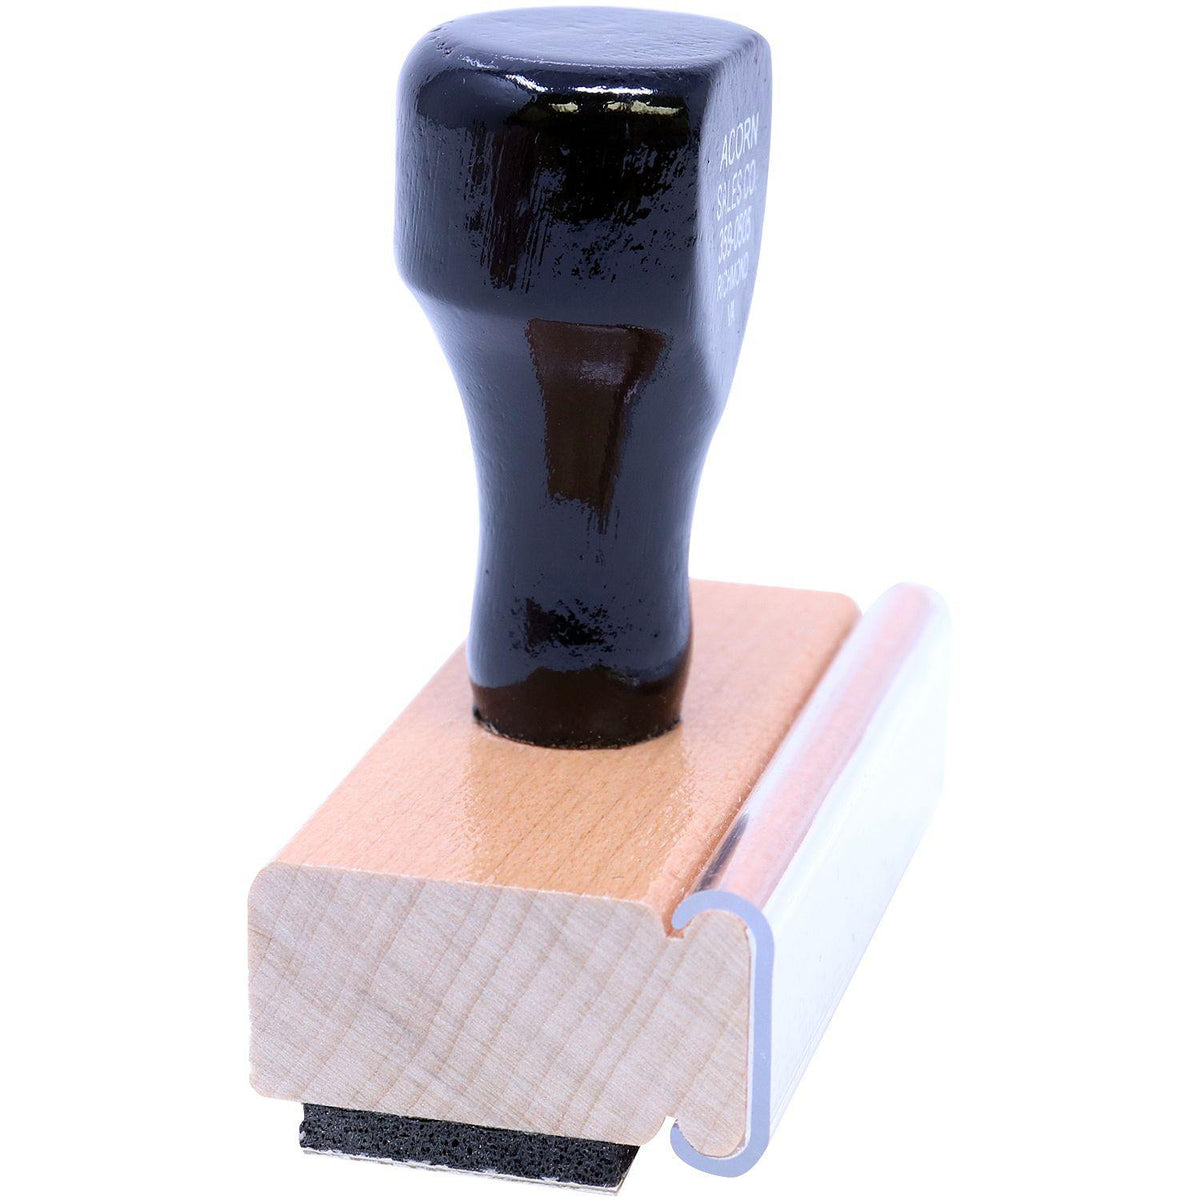 Side View of Temporarily Away Rubber Stamp at an Angle